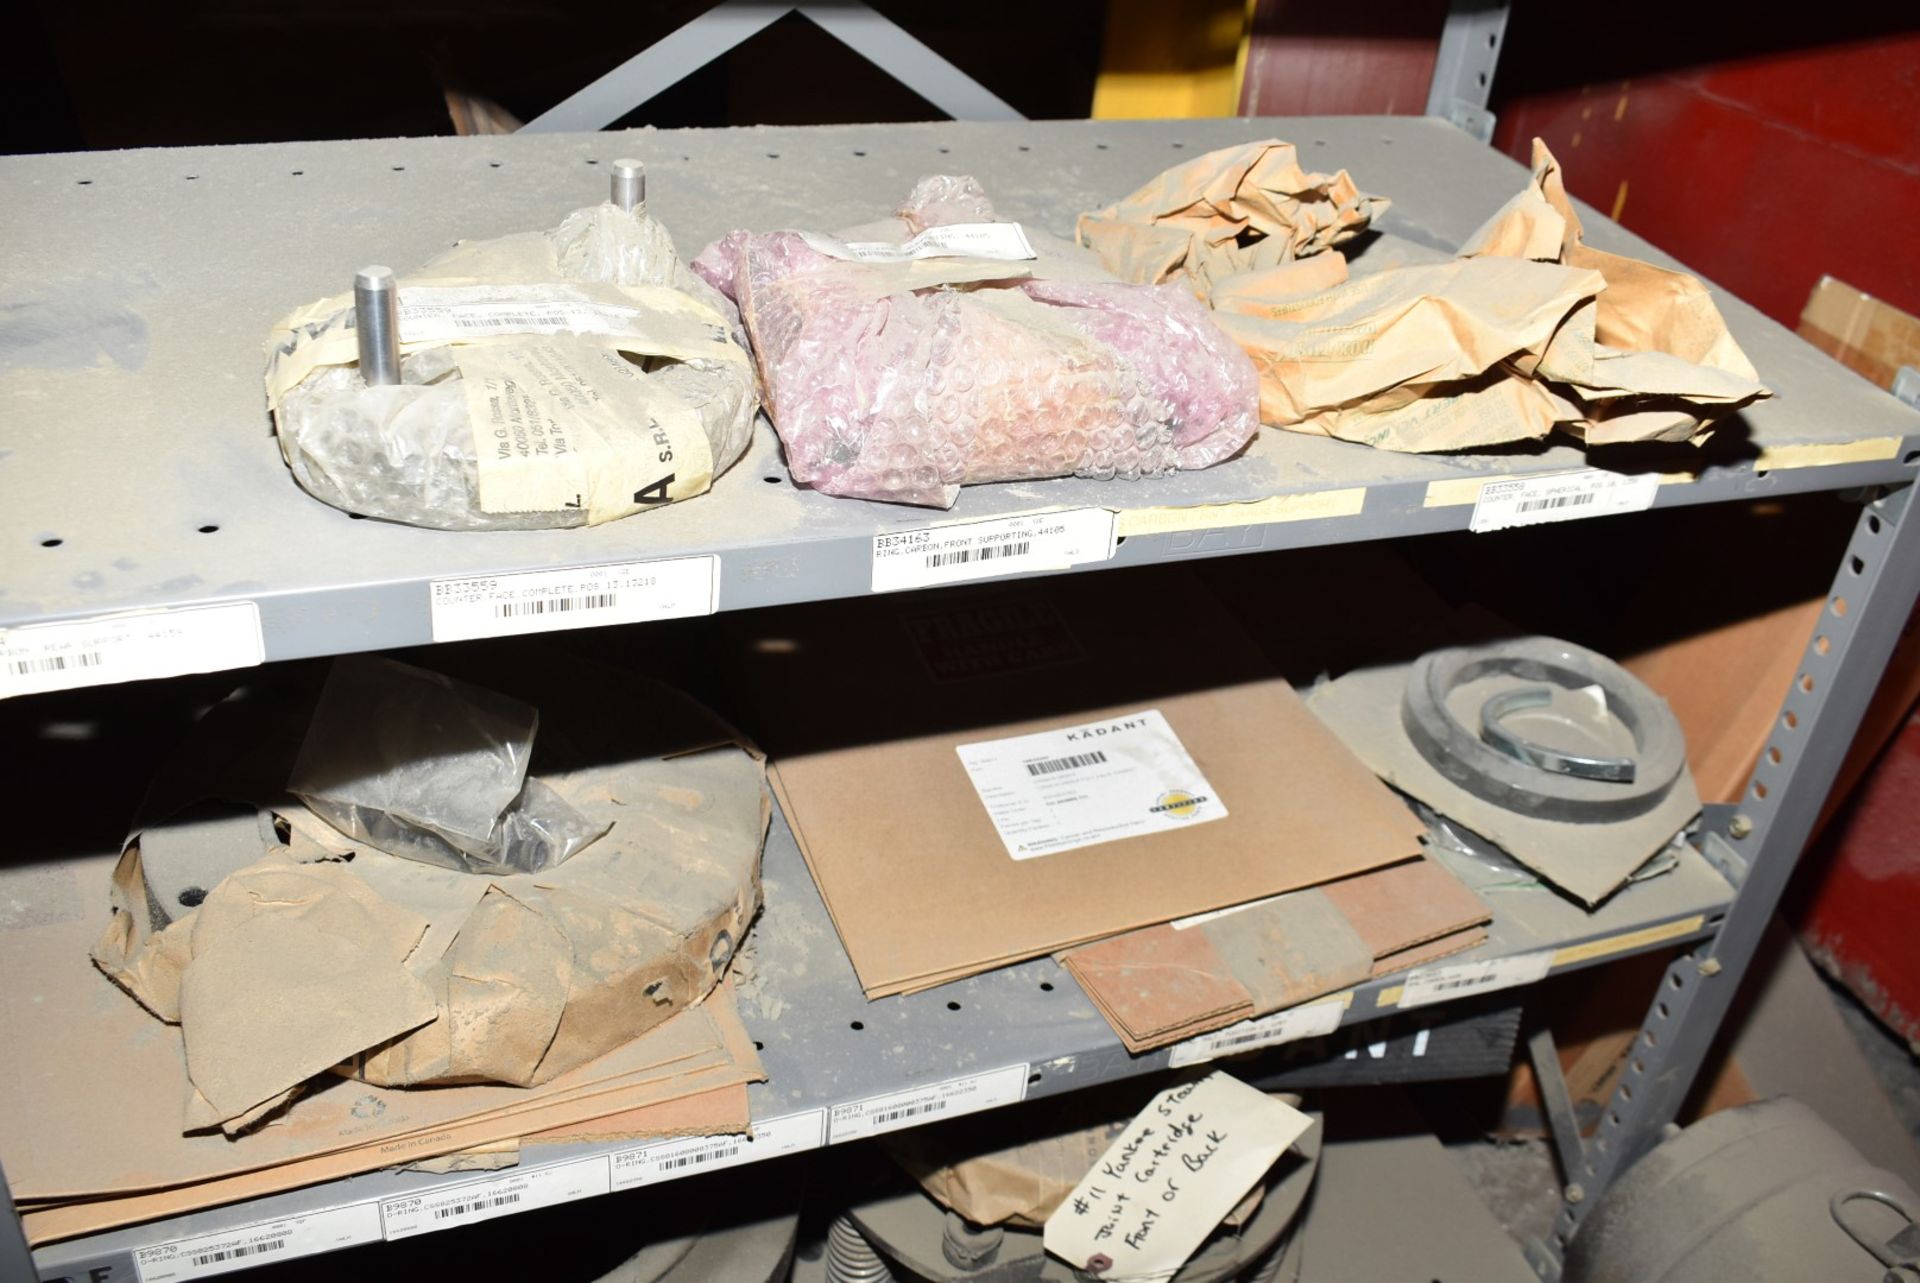 LOT/ CONTENTS OF SHELF - INCLUDING FLEX COUPLINGS, SLITTER BLADES, SPARE PARTS [RIGGING FEES FOR LOT - Image 4 of 6